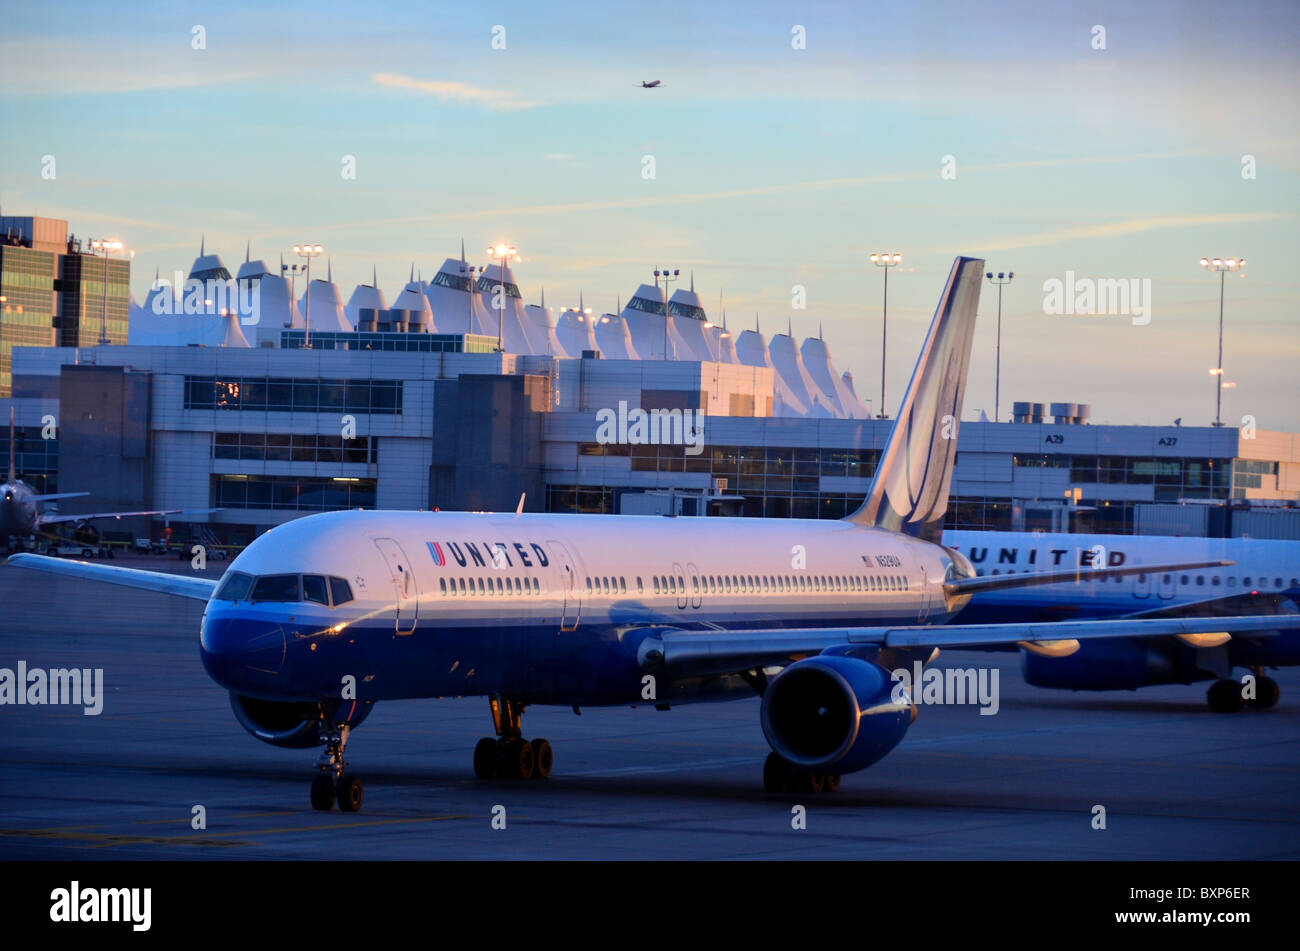 Airliners in airport tarmac. USA Stock Photo